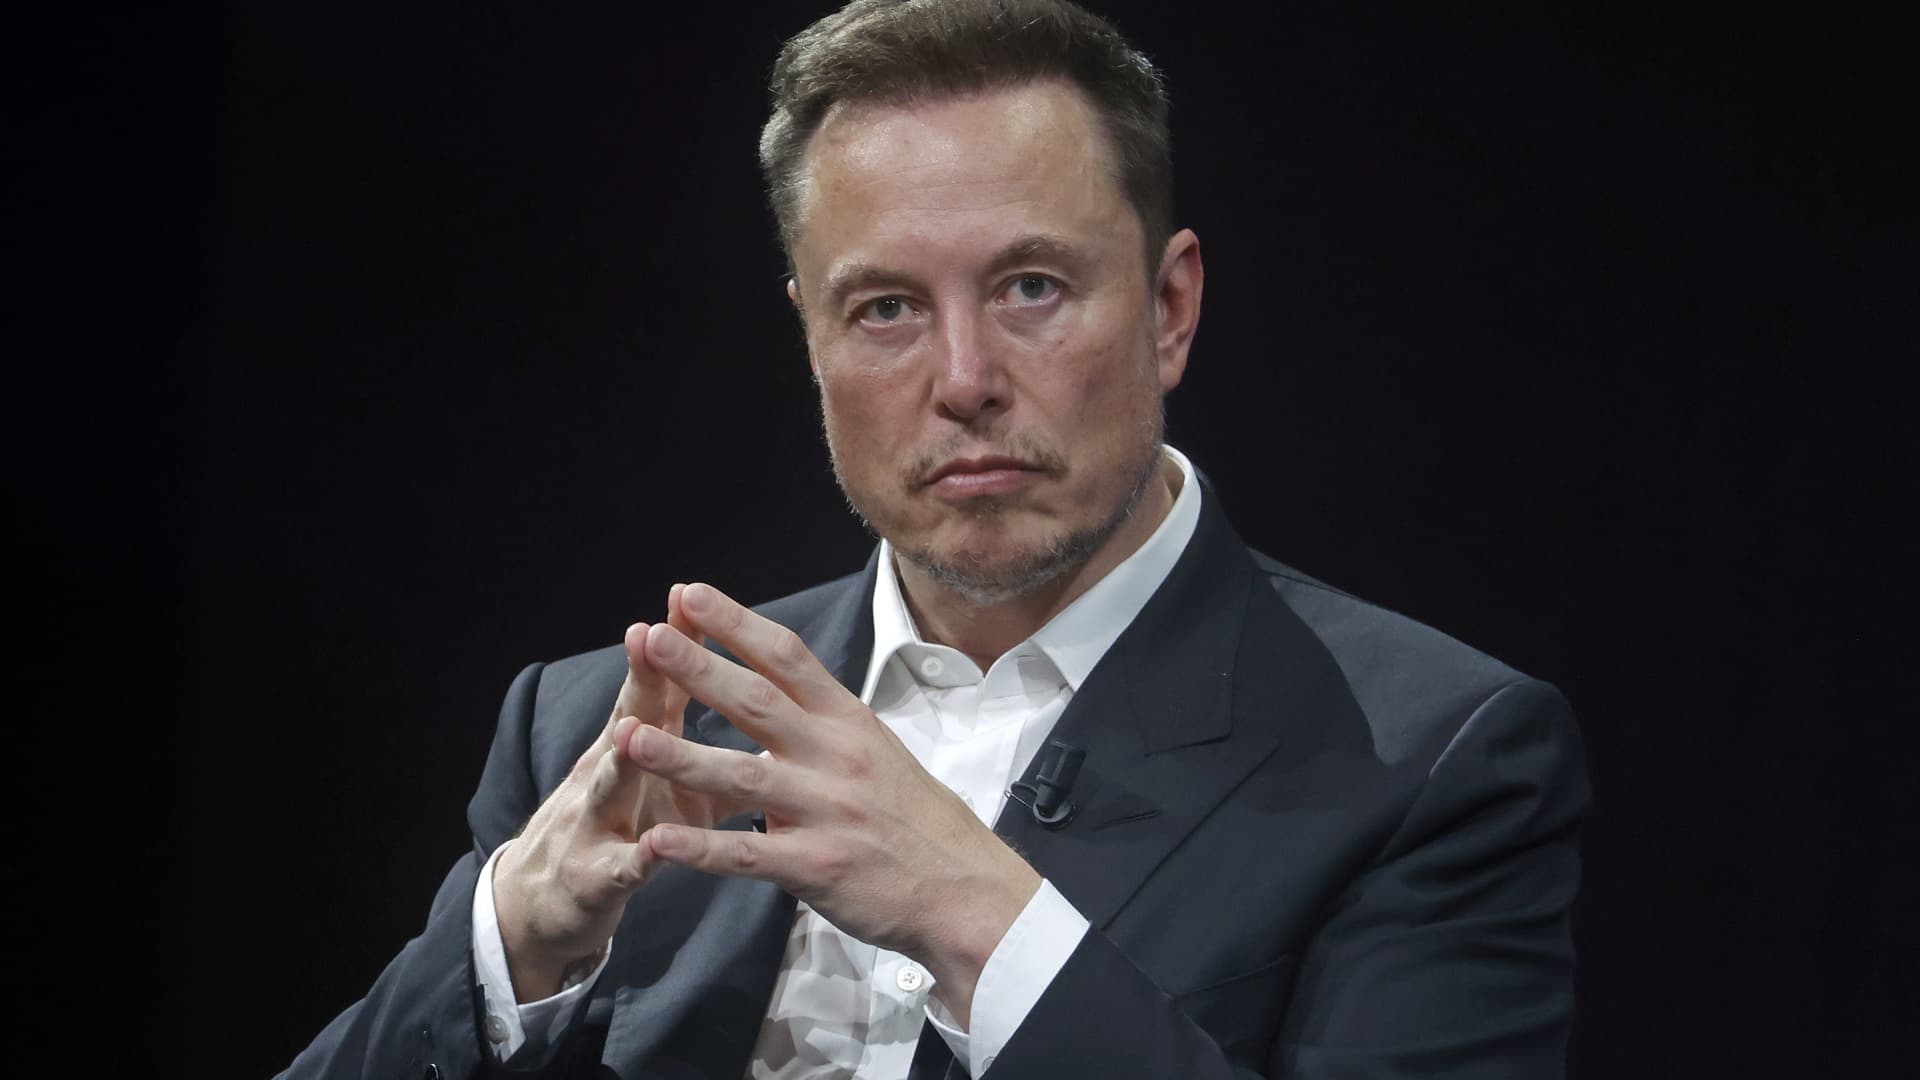 Elon Musk moving servers himself shows his ‘maniacal sense of urgency’ at X, formerly Twitter